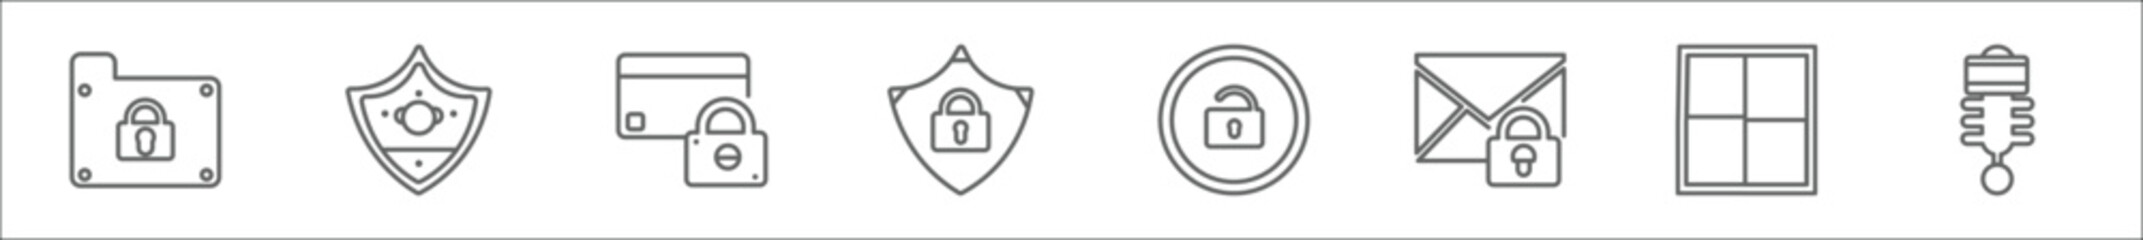 outline set of security line icons. linear vector icons such as lock folder, rhomboid, locked card, protector, unlock padlock, secure envelope, checkered shield, shock absorber